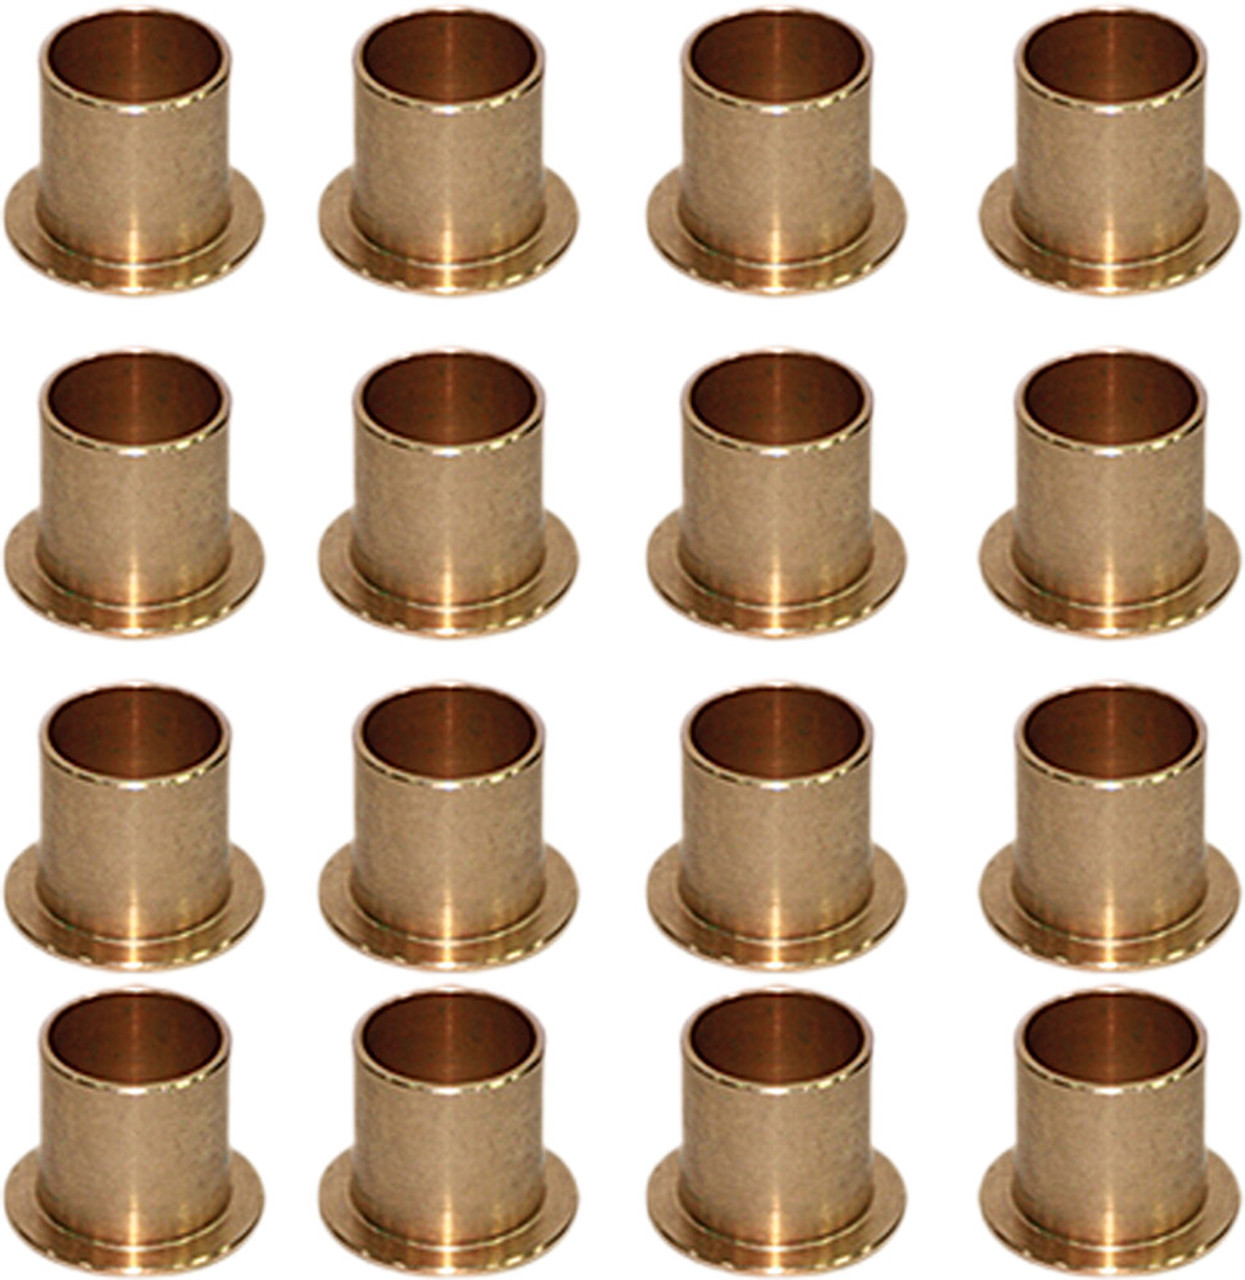 Front End Bushing Kit compatible with Ski-Doo All Rev Chassis Models 2003-2009 Part# 44-8548